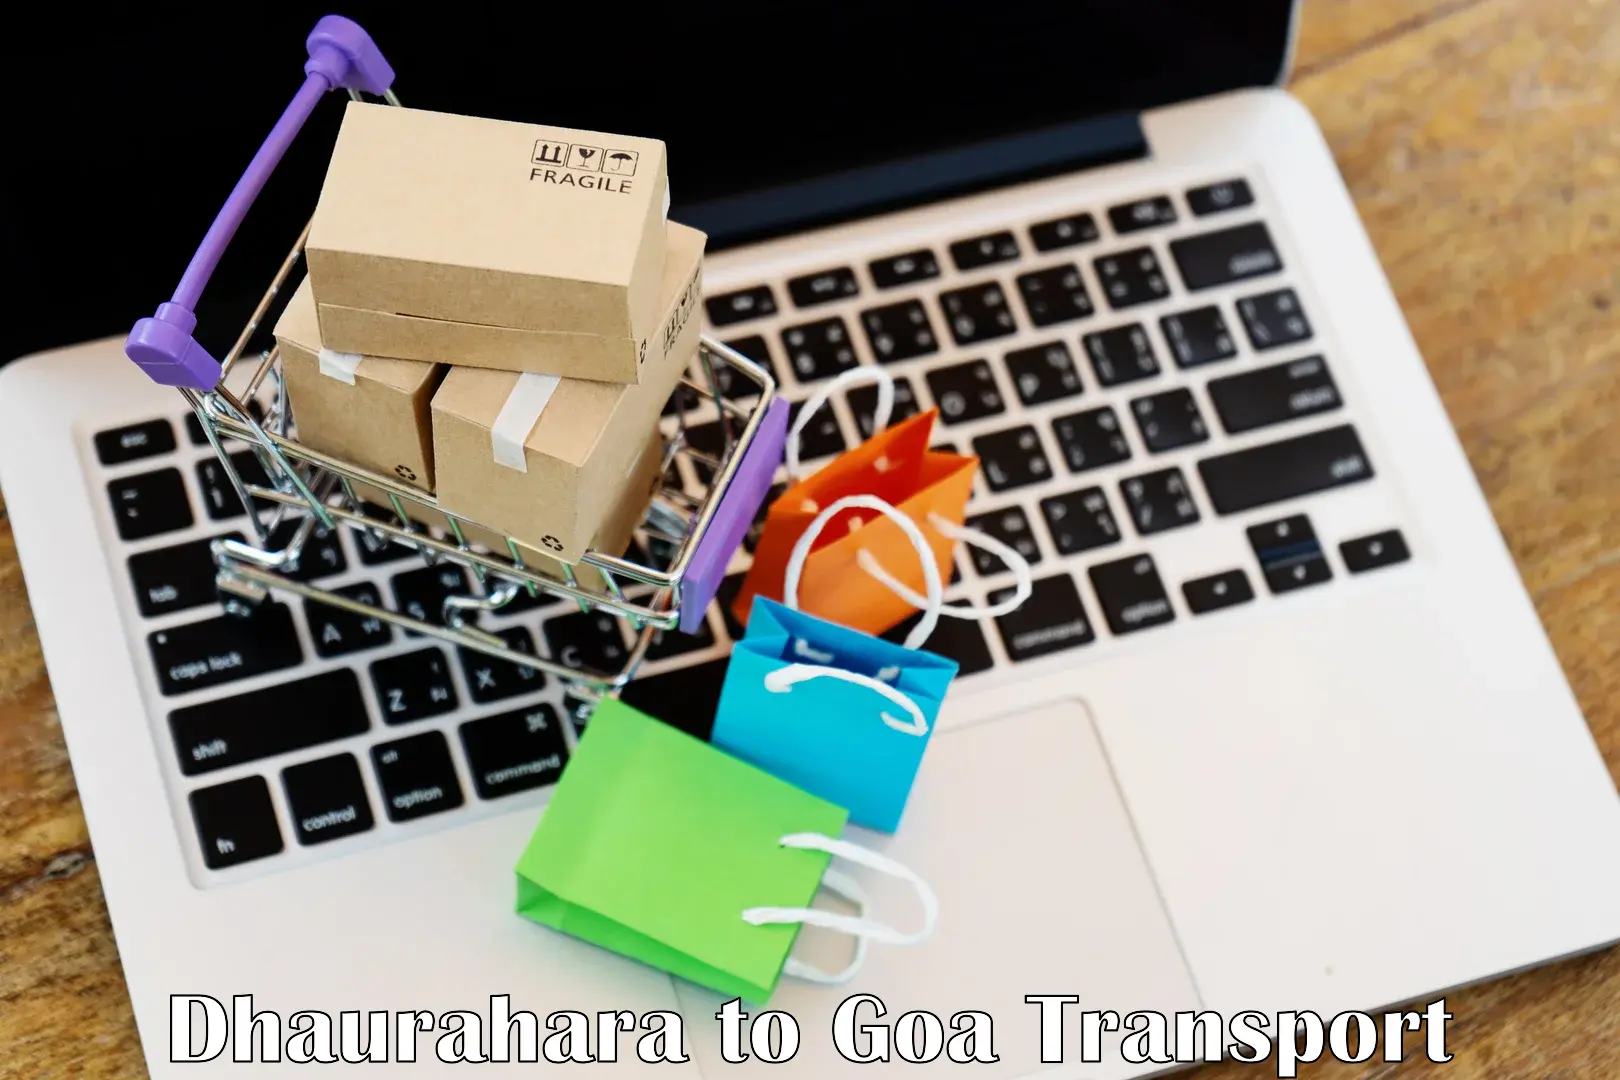 Vehicle transport services Dhaurahara to Goa